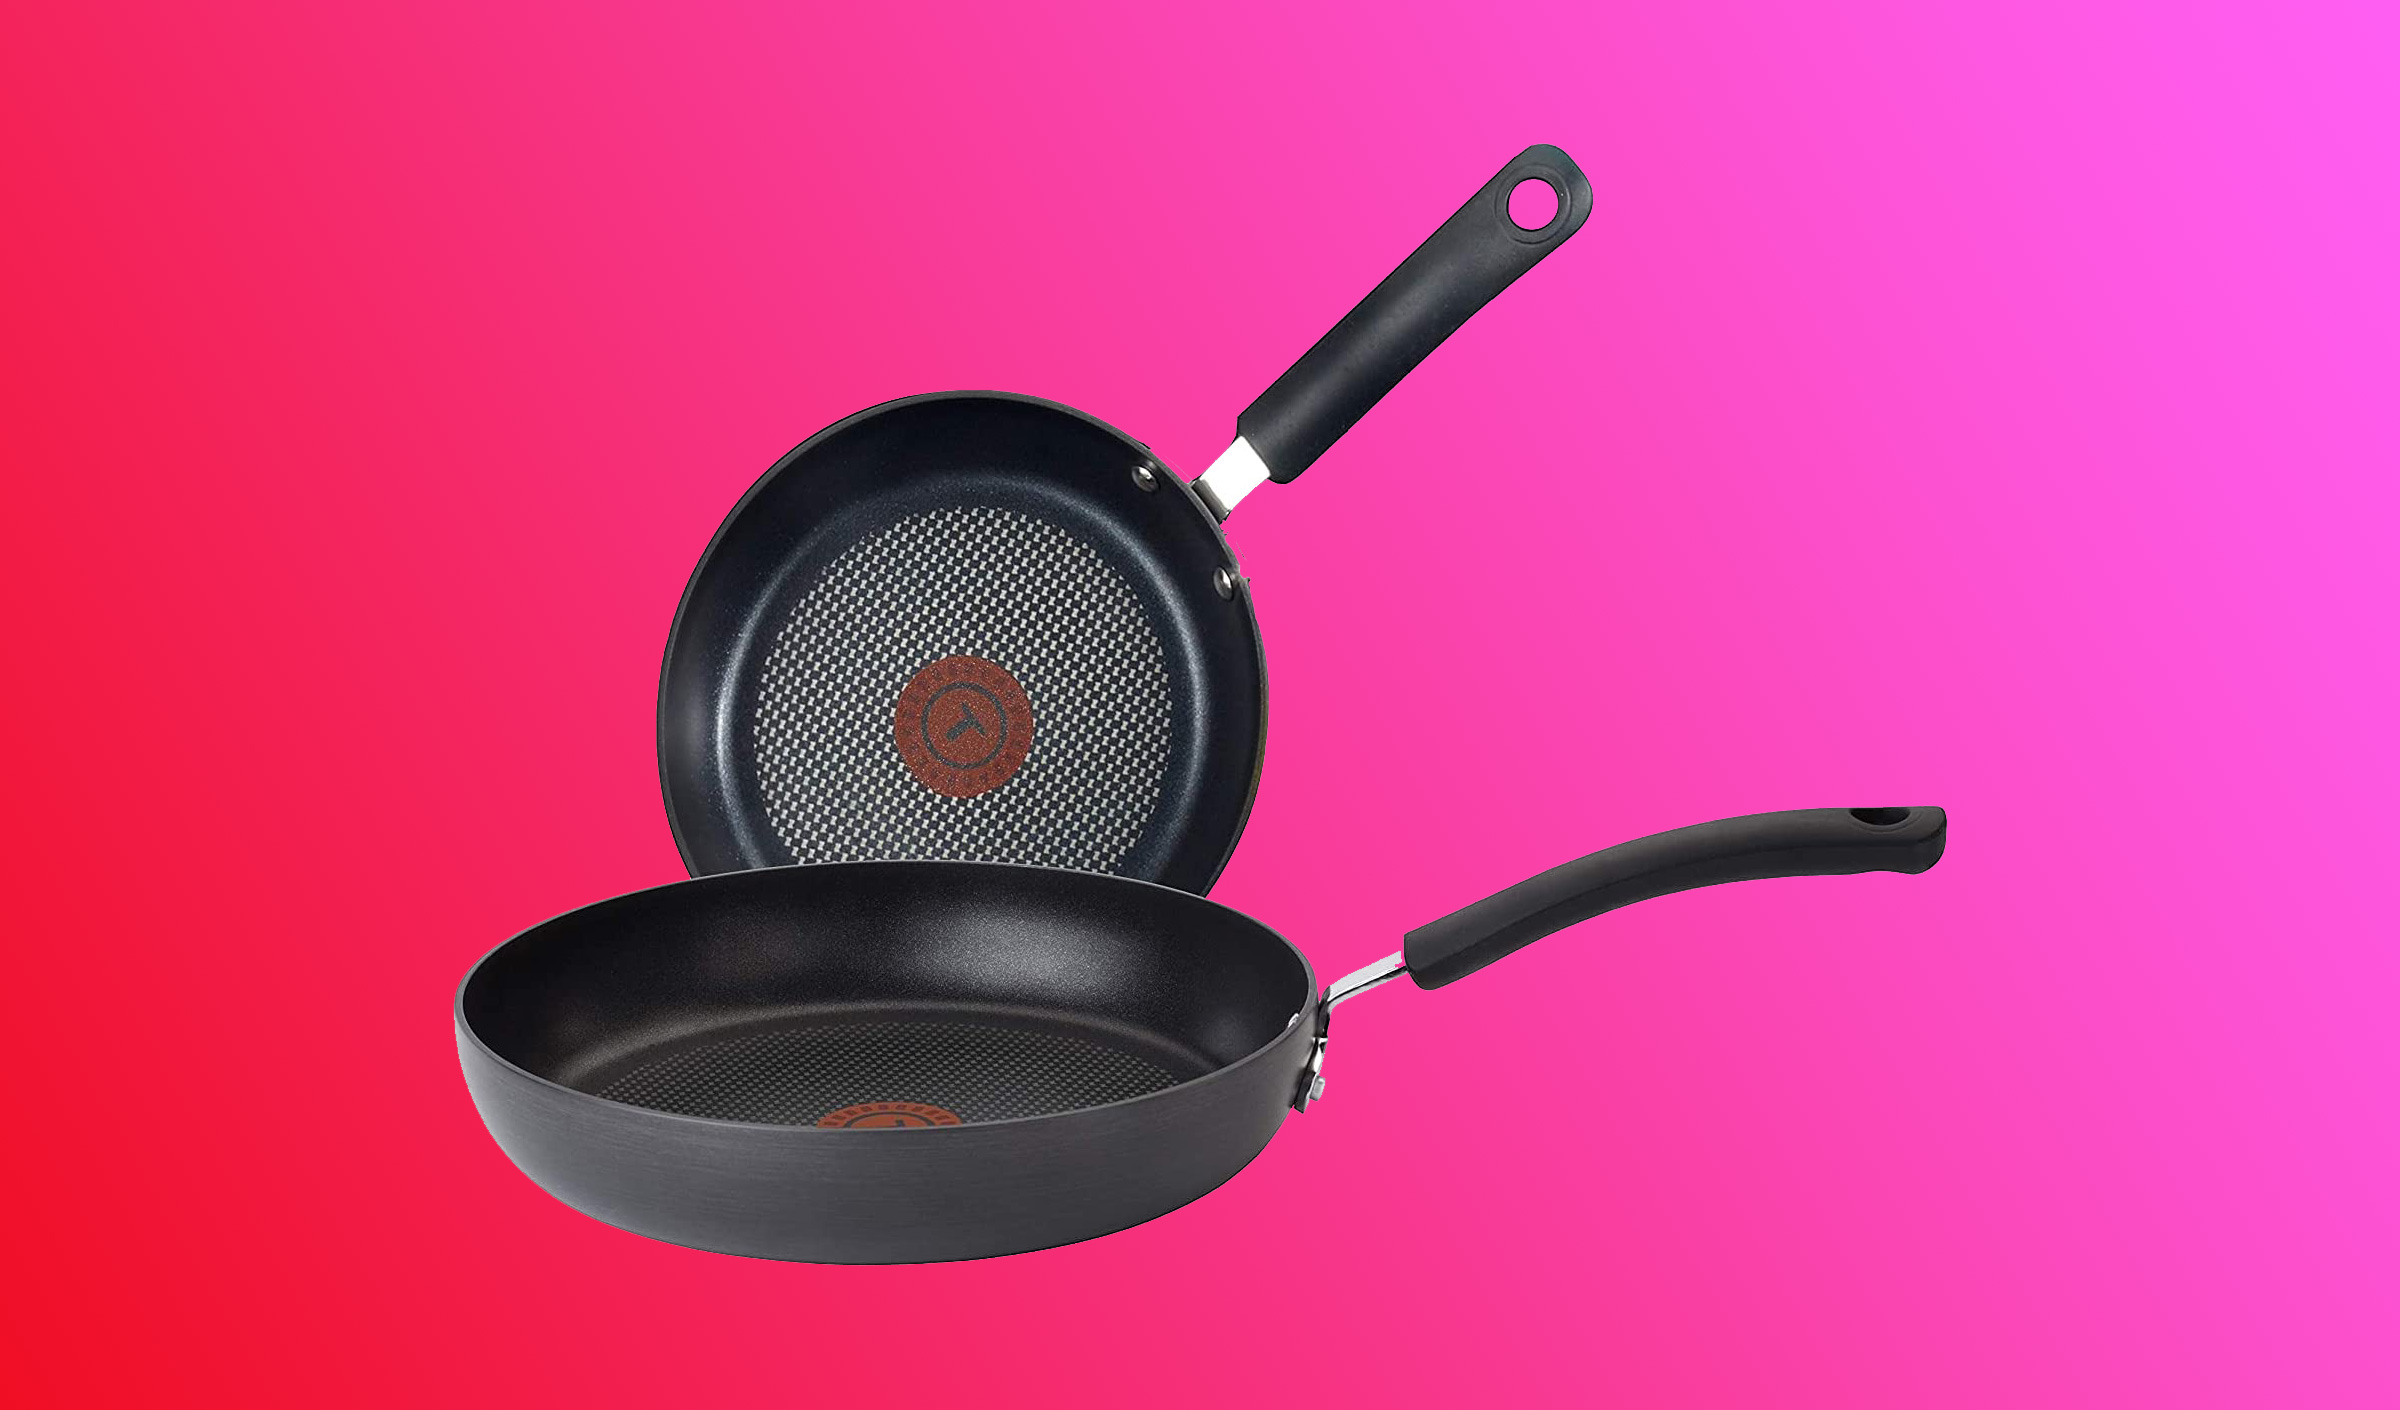 Black Friday 2022: Take $400 off this Hex Clad cookware set